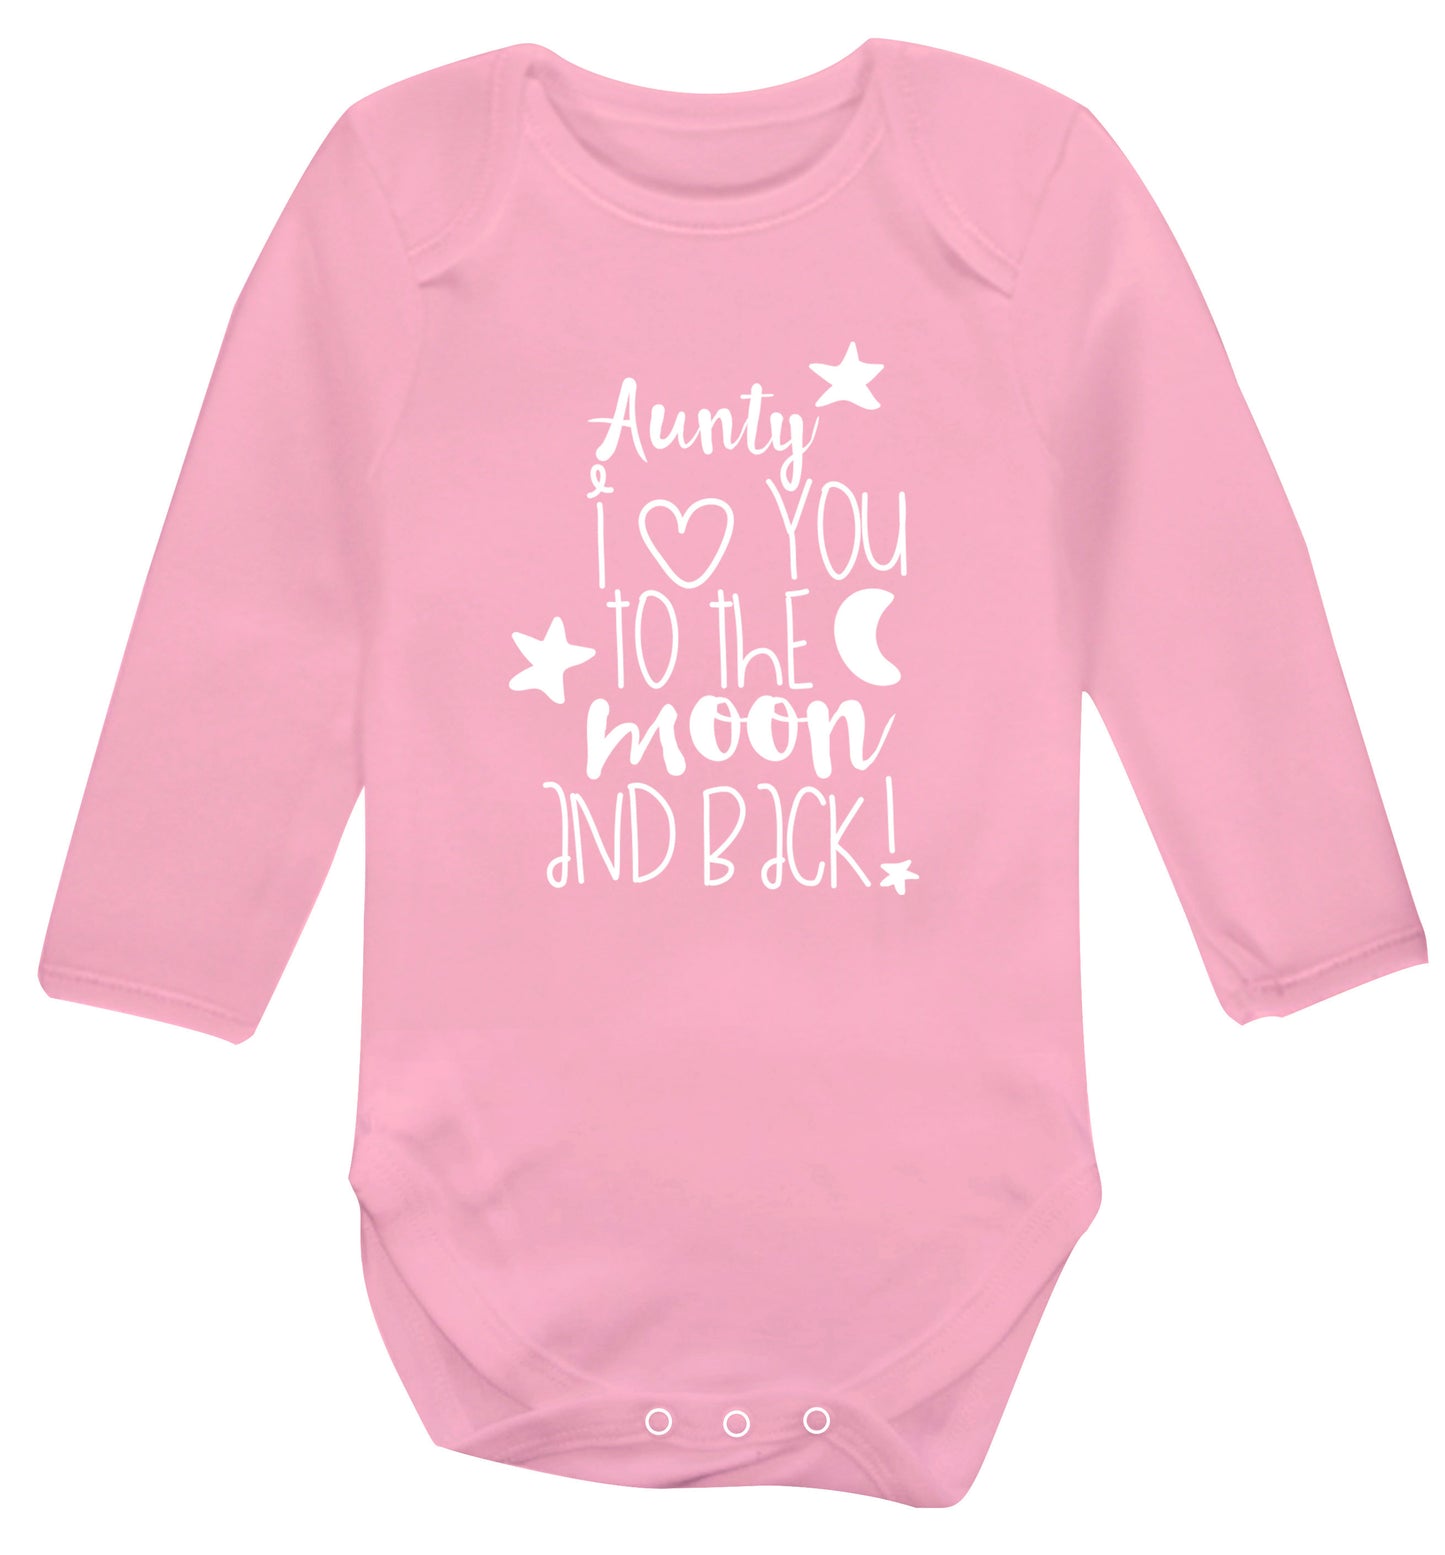 Aunty I love you to the moon and back Baby Vest long sleeved pale pink 6-12 months